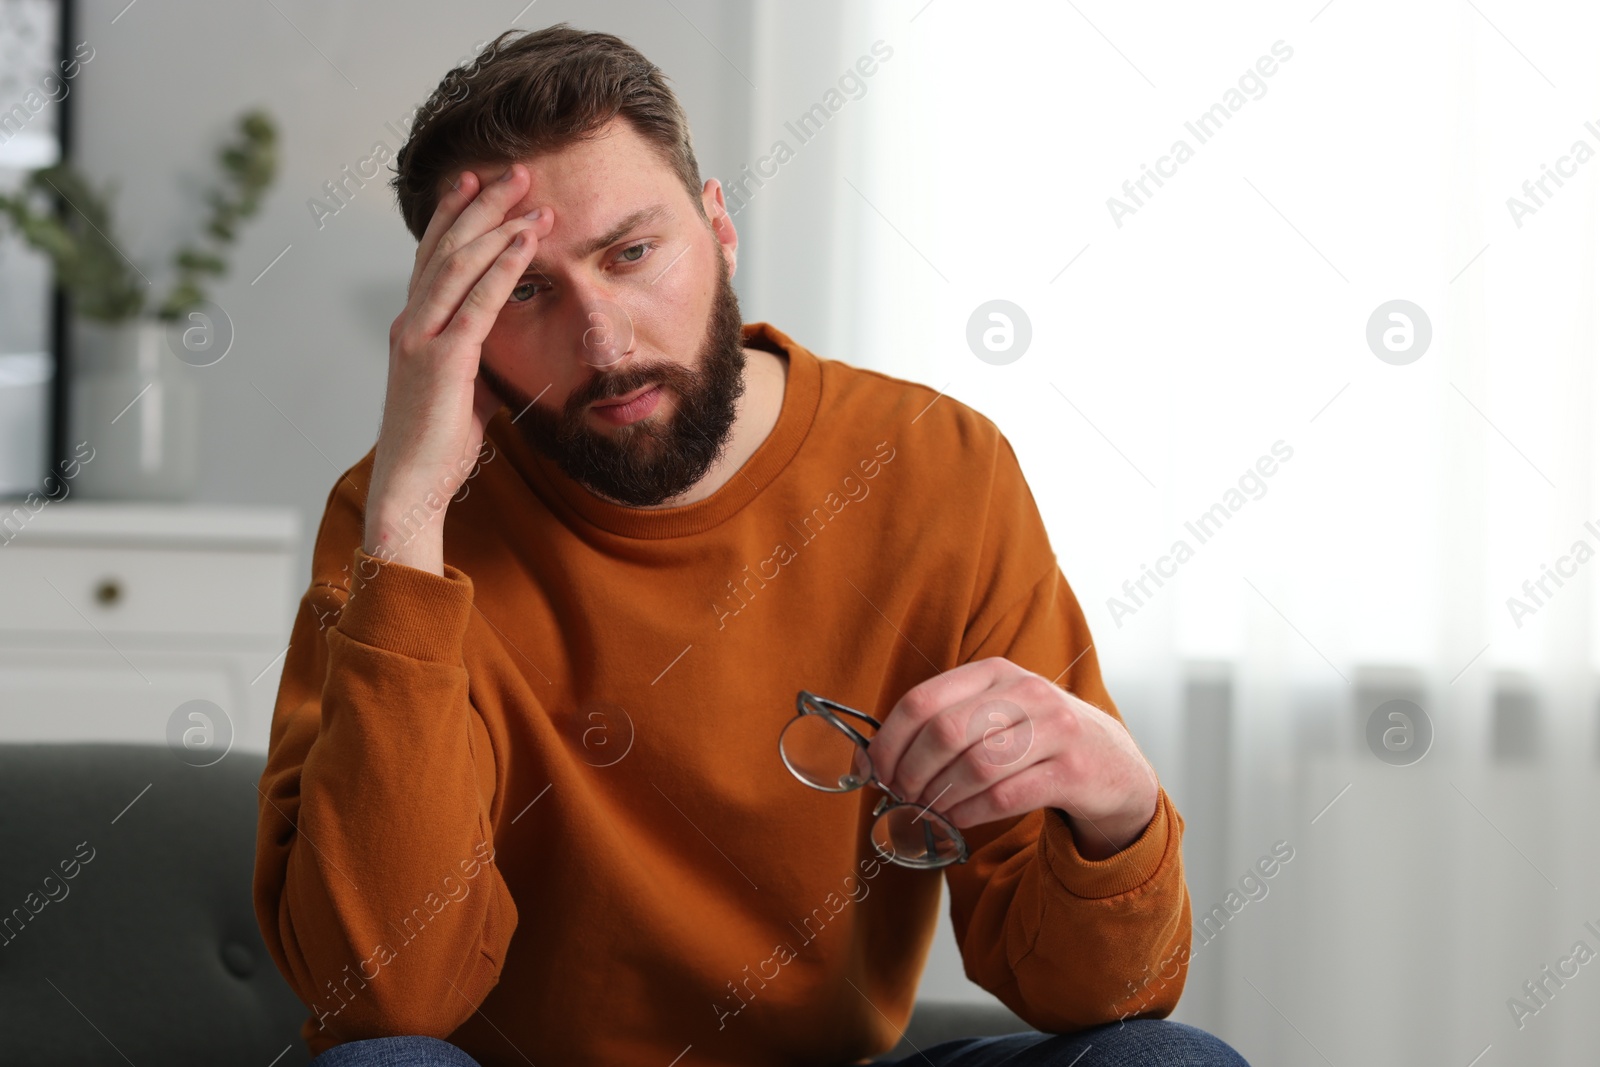 Photo of Overwhelmed man with glasses suffering at home